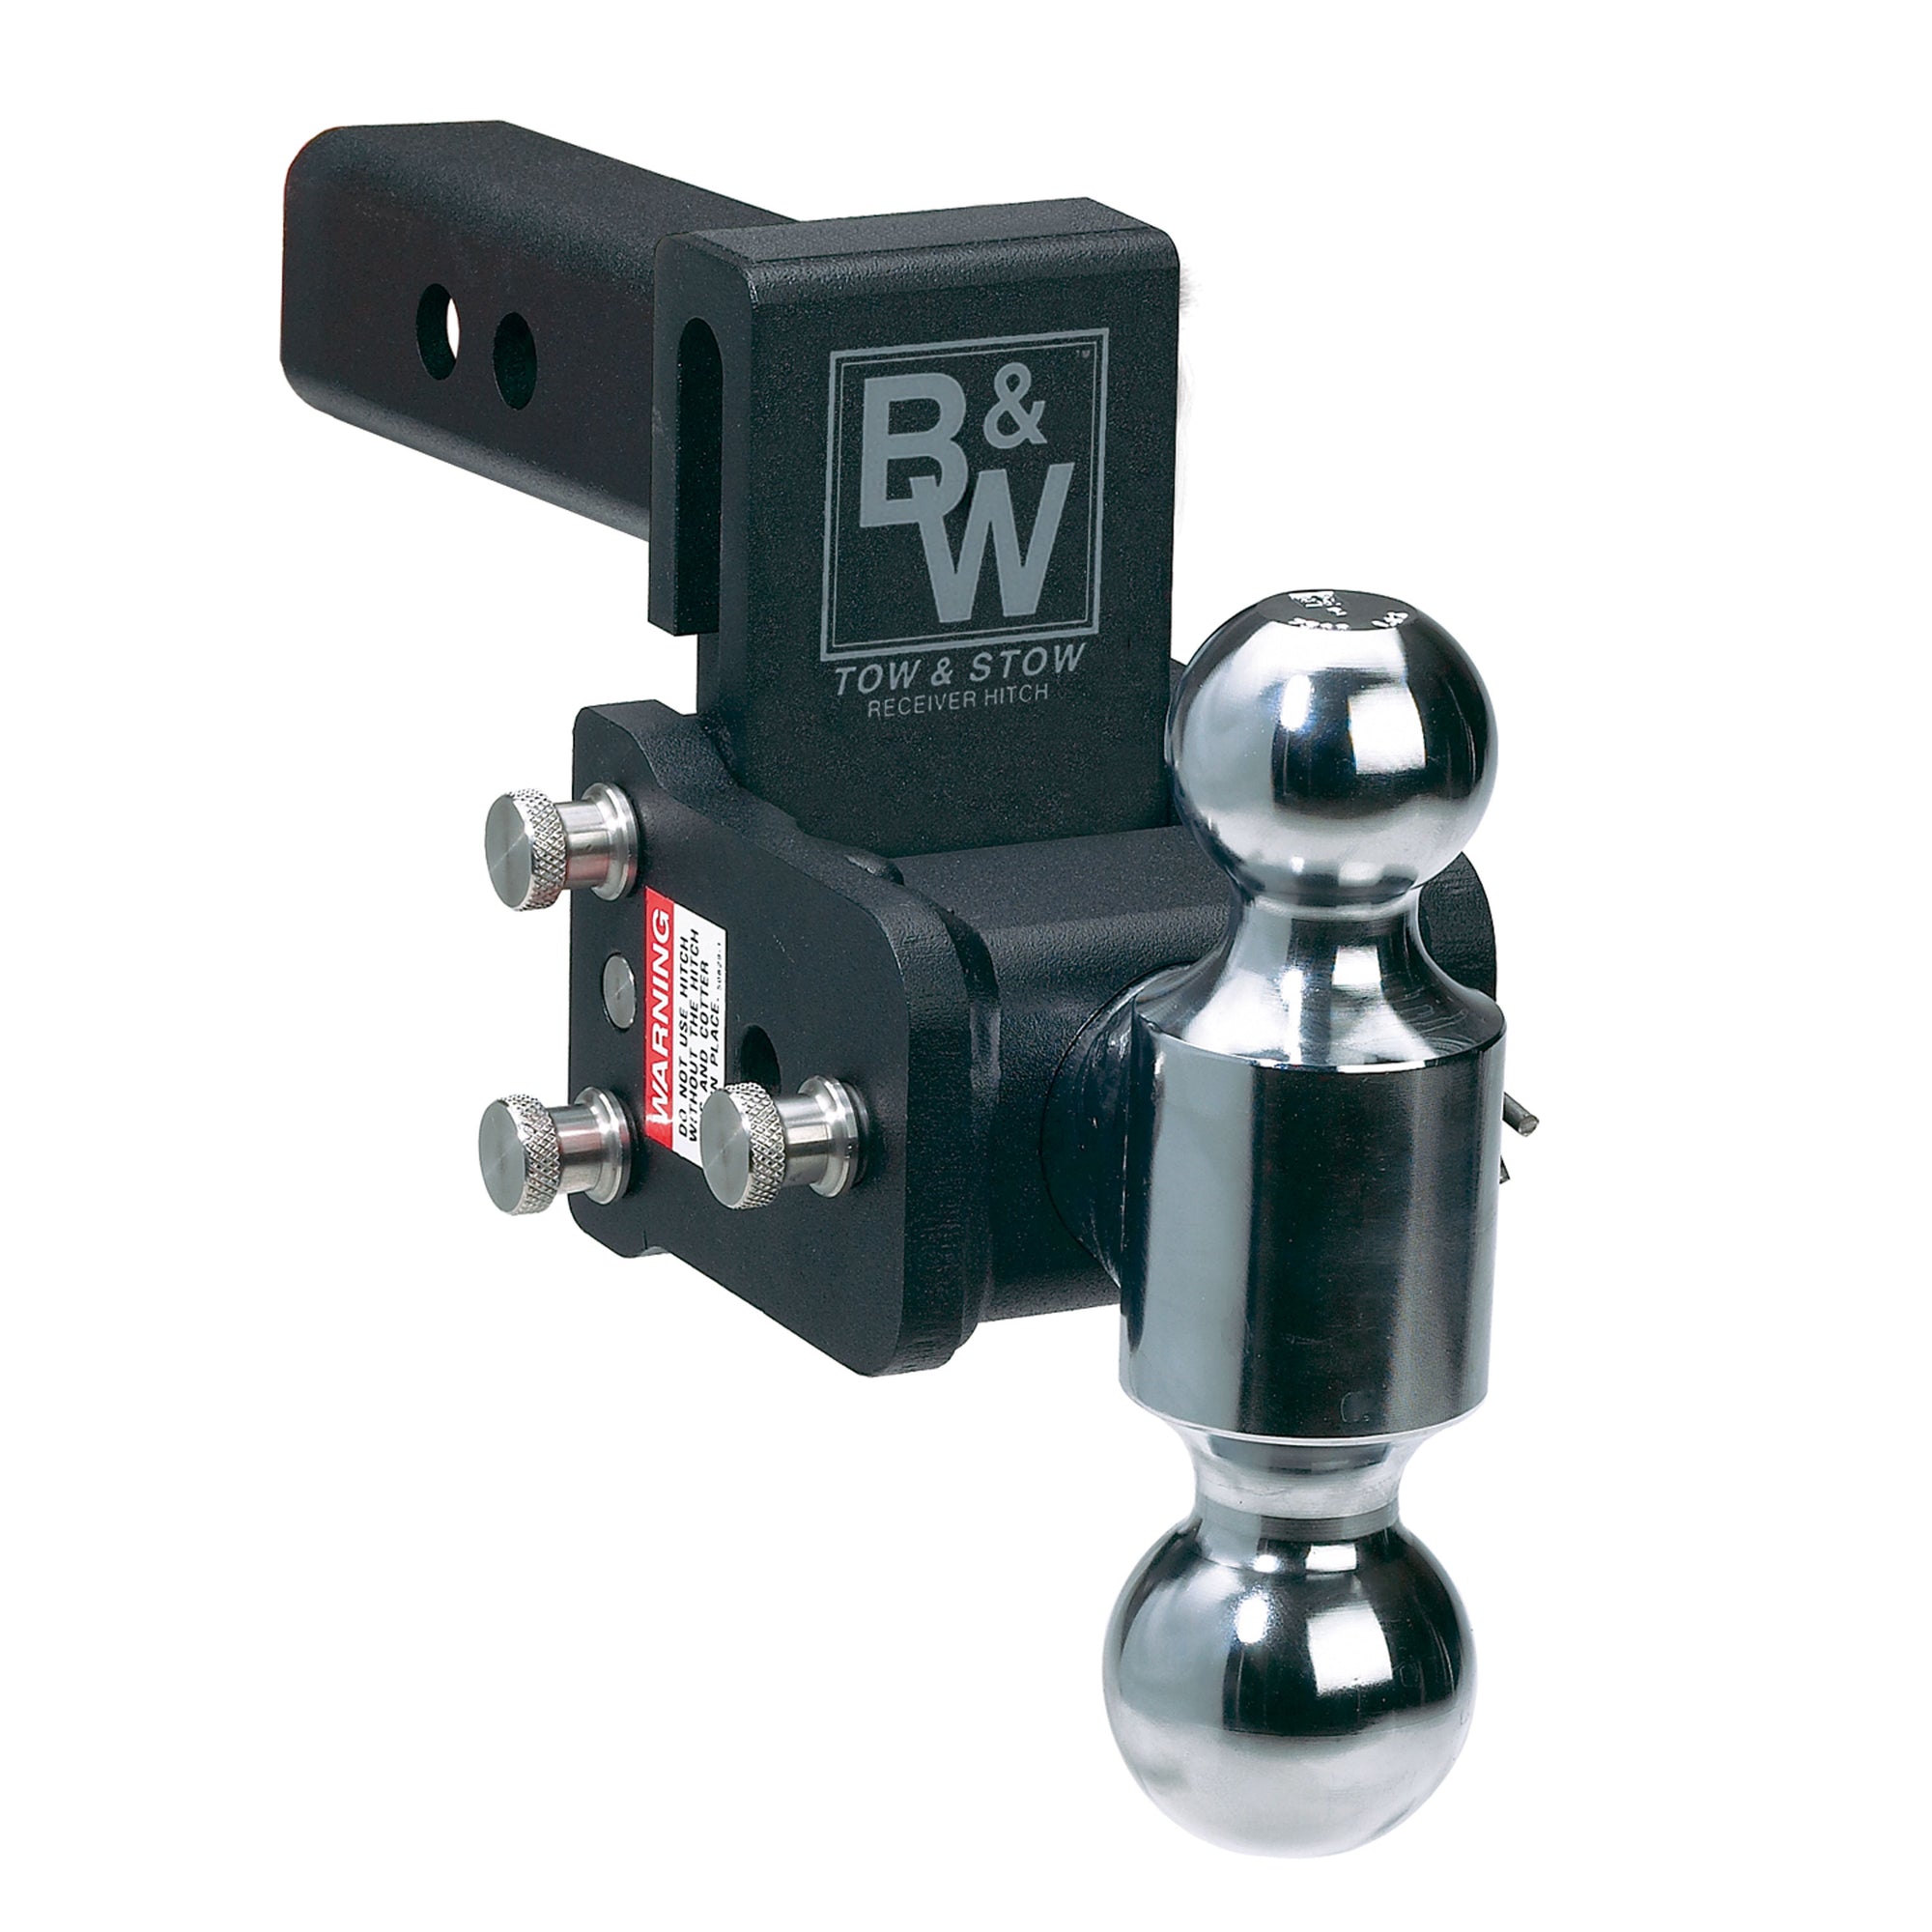 B&W Trailer Hitches TS10037B Tow and Stow Adjustable Ball Mount - 2-5/16" & 2" Ball, 5" Drop, 5.5" Rise, Black